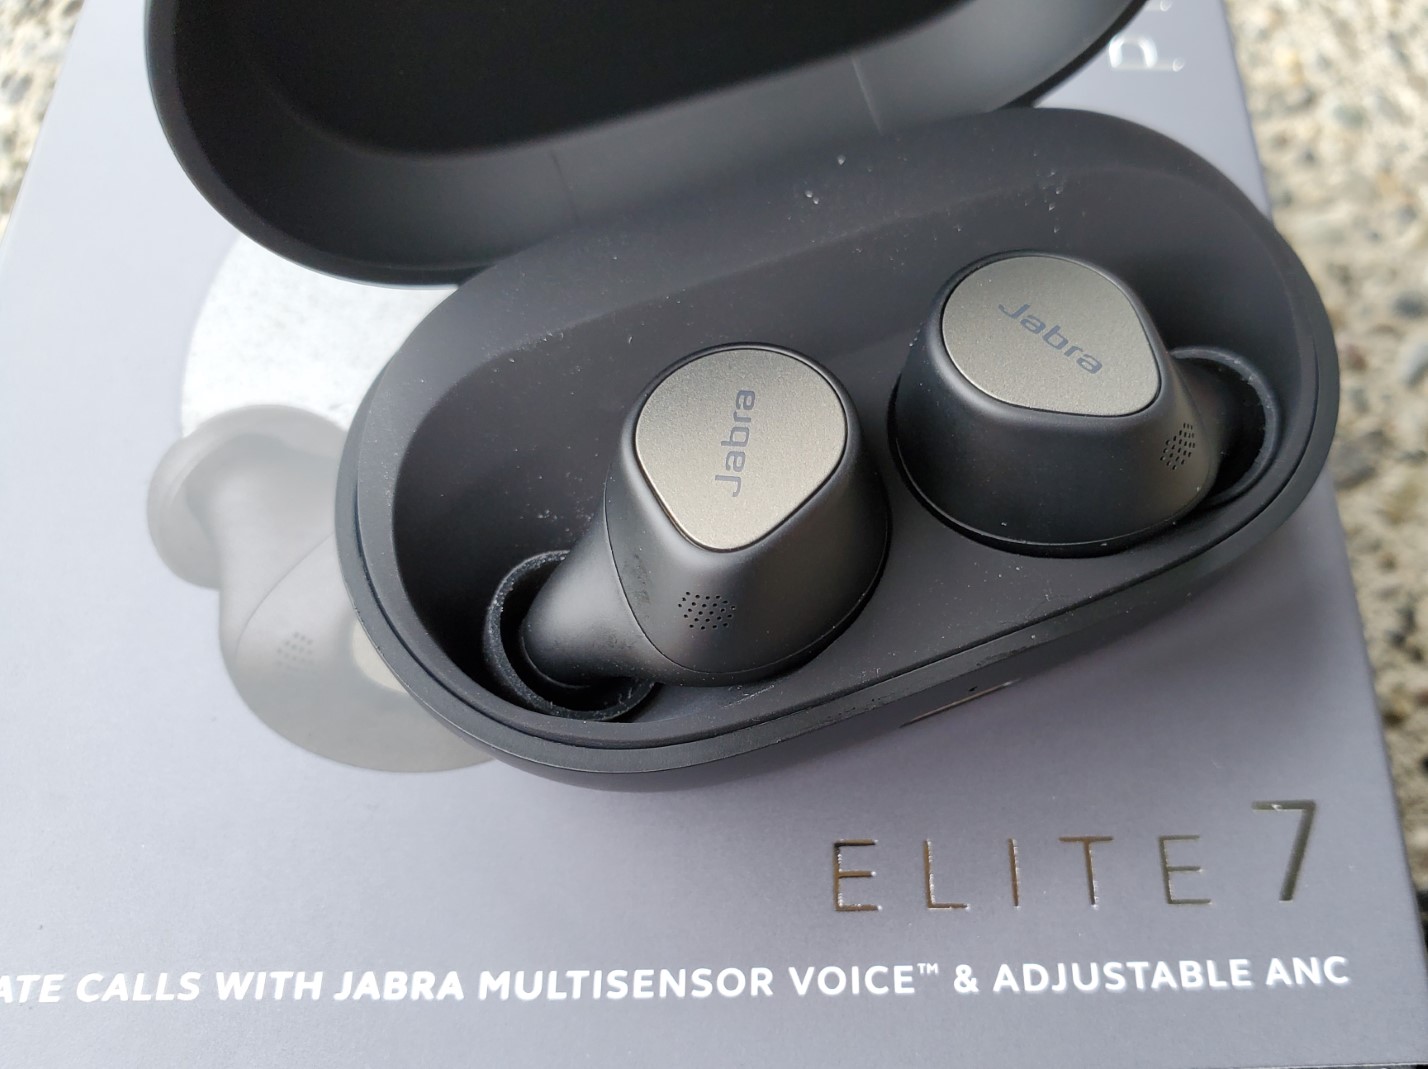 Jabra Elite 7 Pro review: Buy for outstanding phone calls, not for 